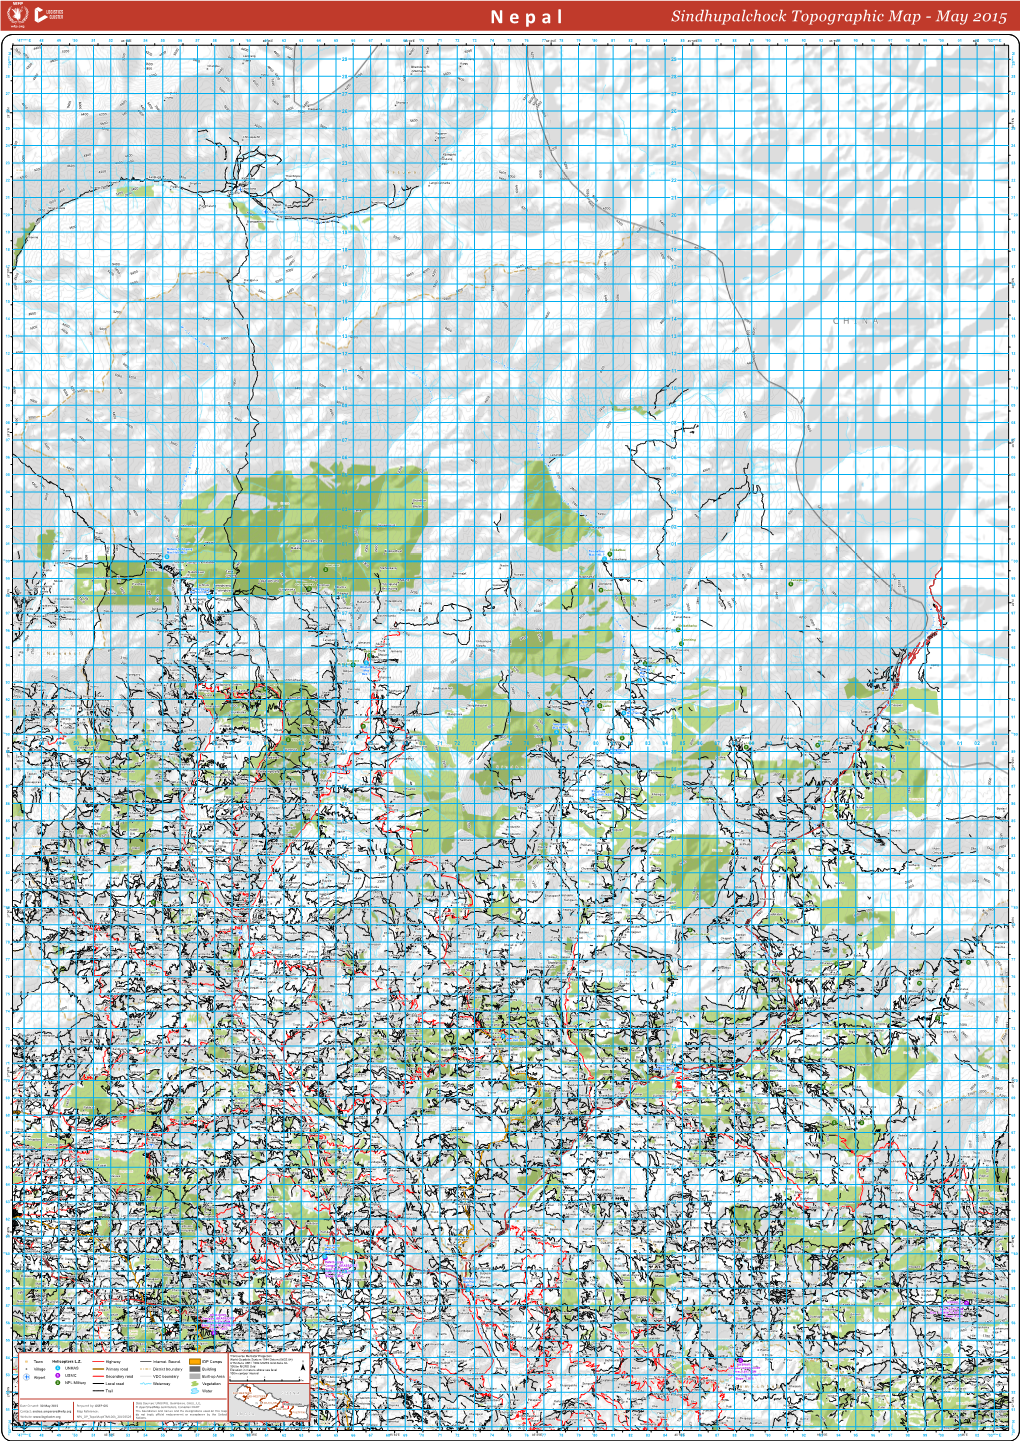 Sindhupalchock Topographic Map - May 2015